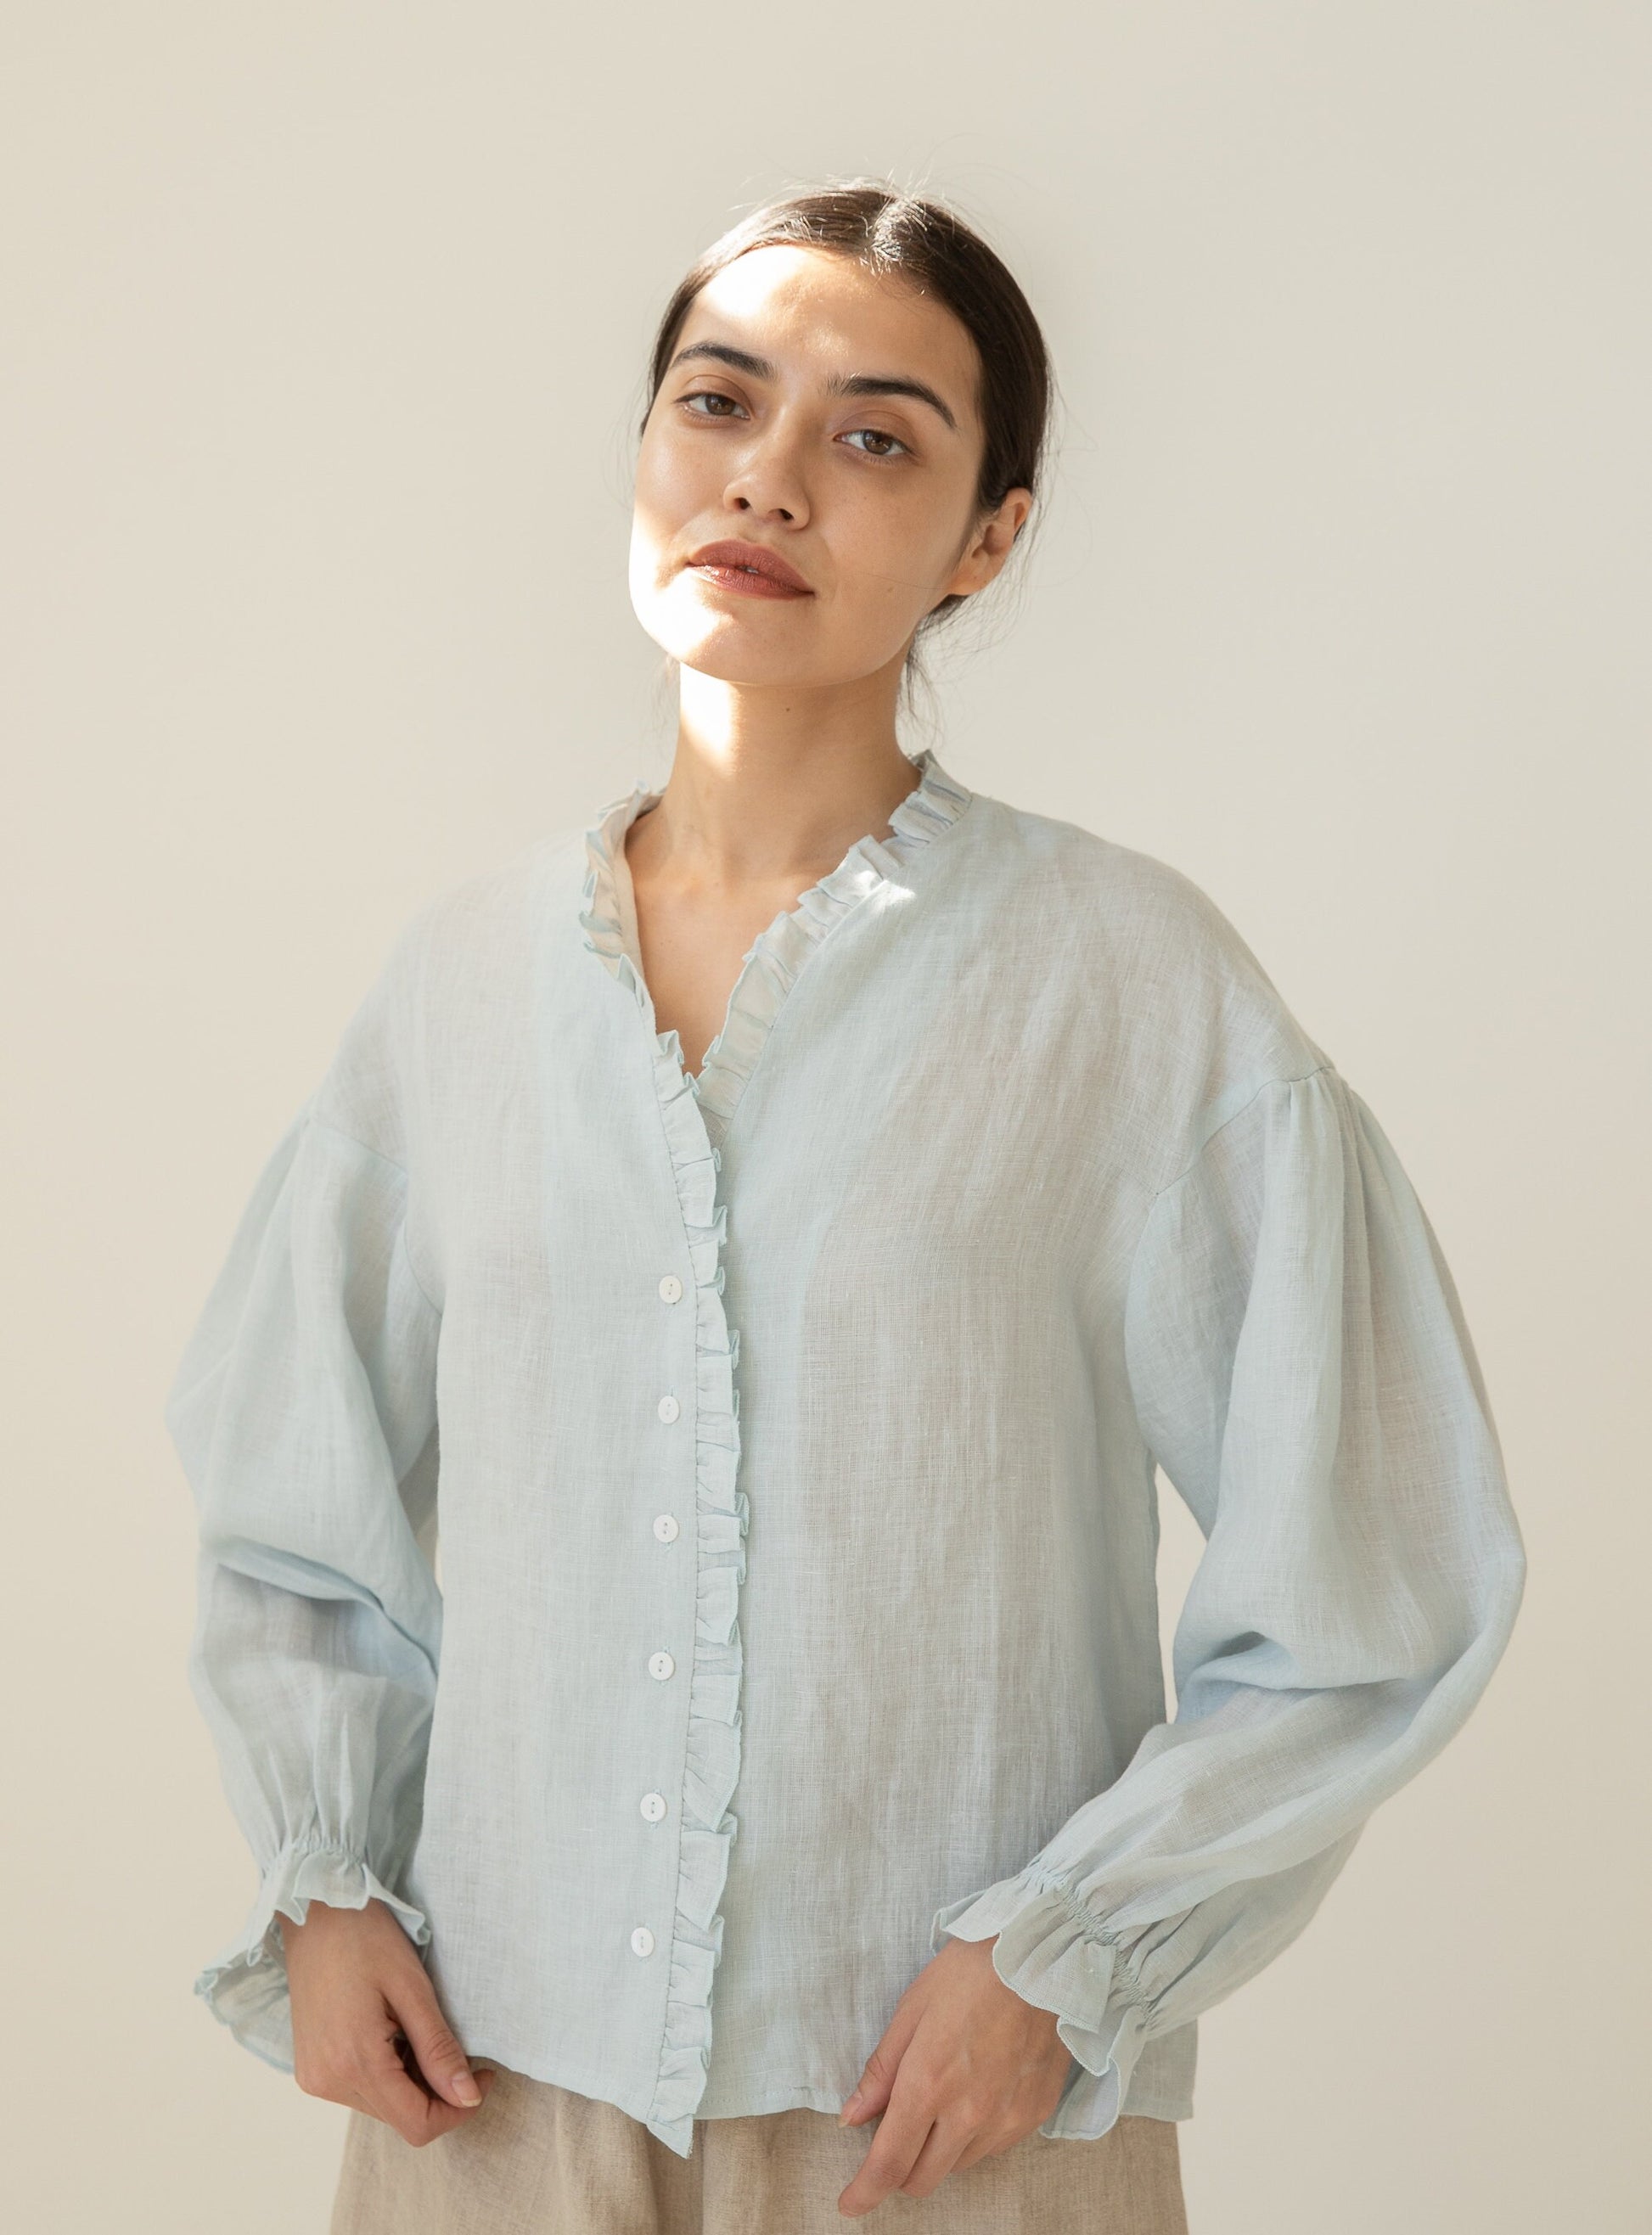 Breathable Linen Blouse with delicate ruffle placket detail.